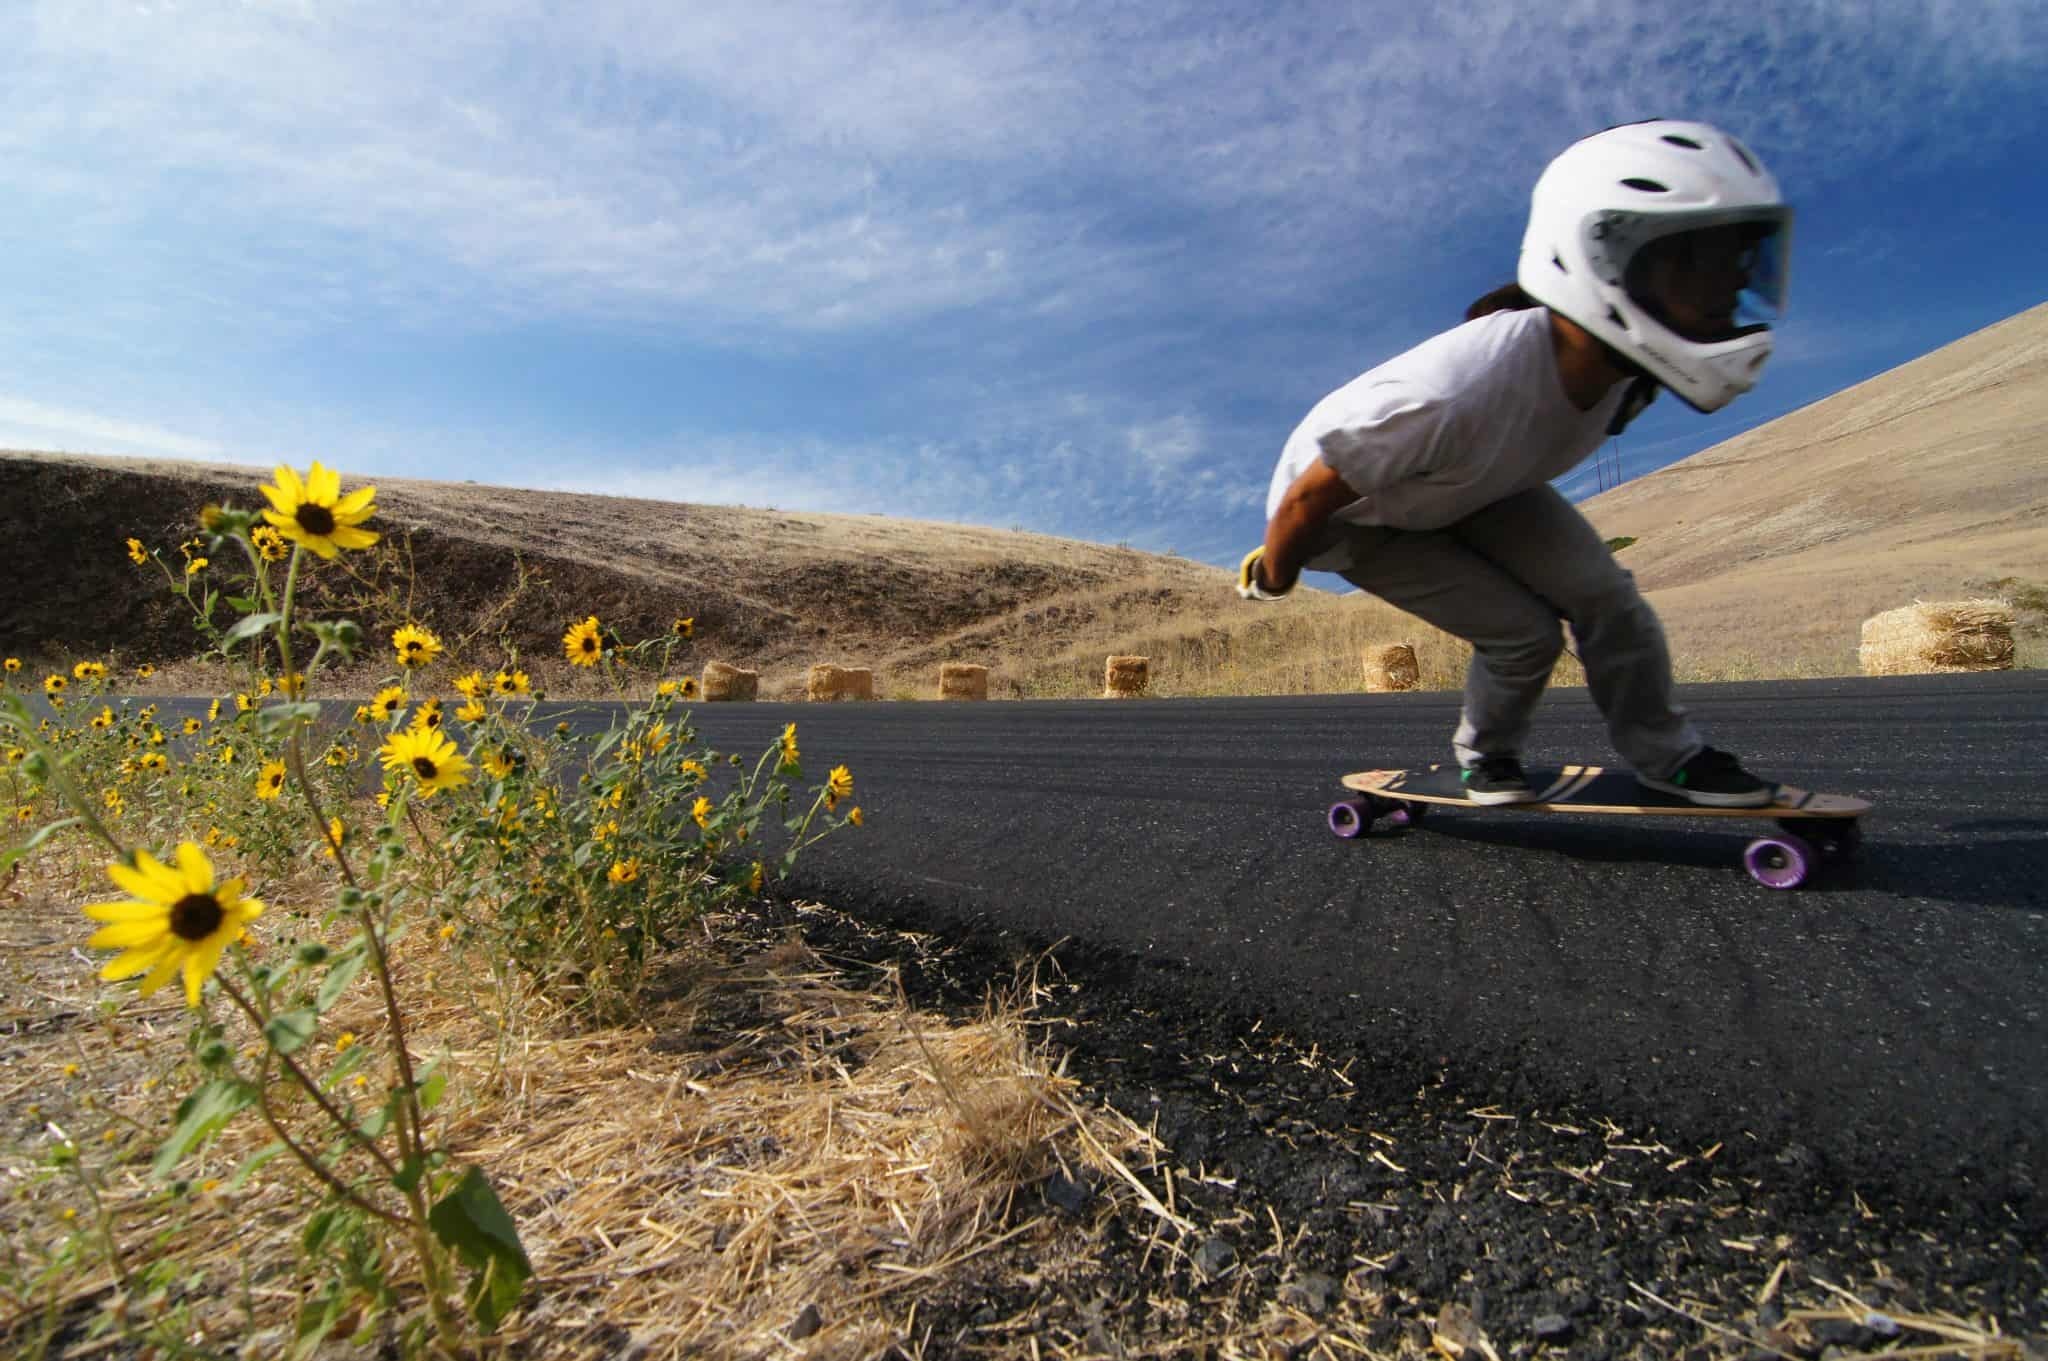 Longboarding: The rider uses Reverse Kingpin Trucks longboard to downhill, Extreme sport. 2050x1370 HD Background.